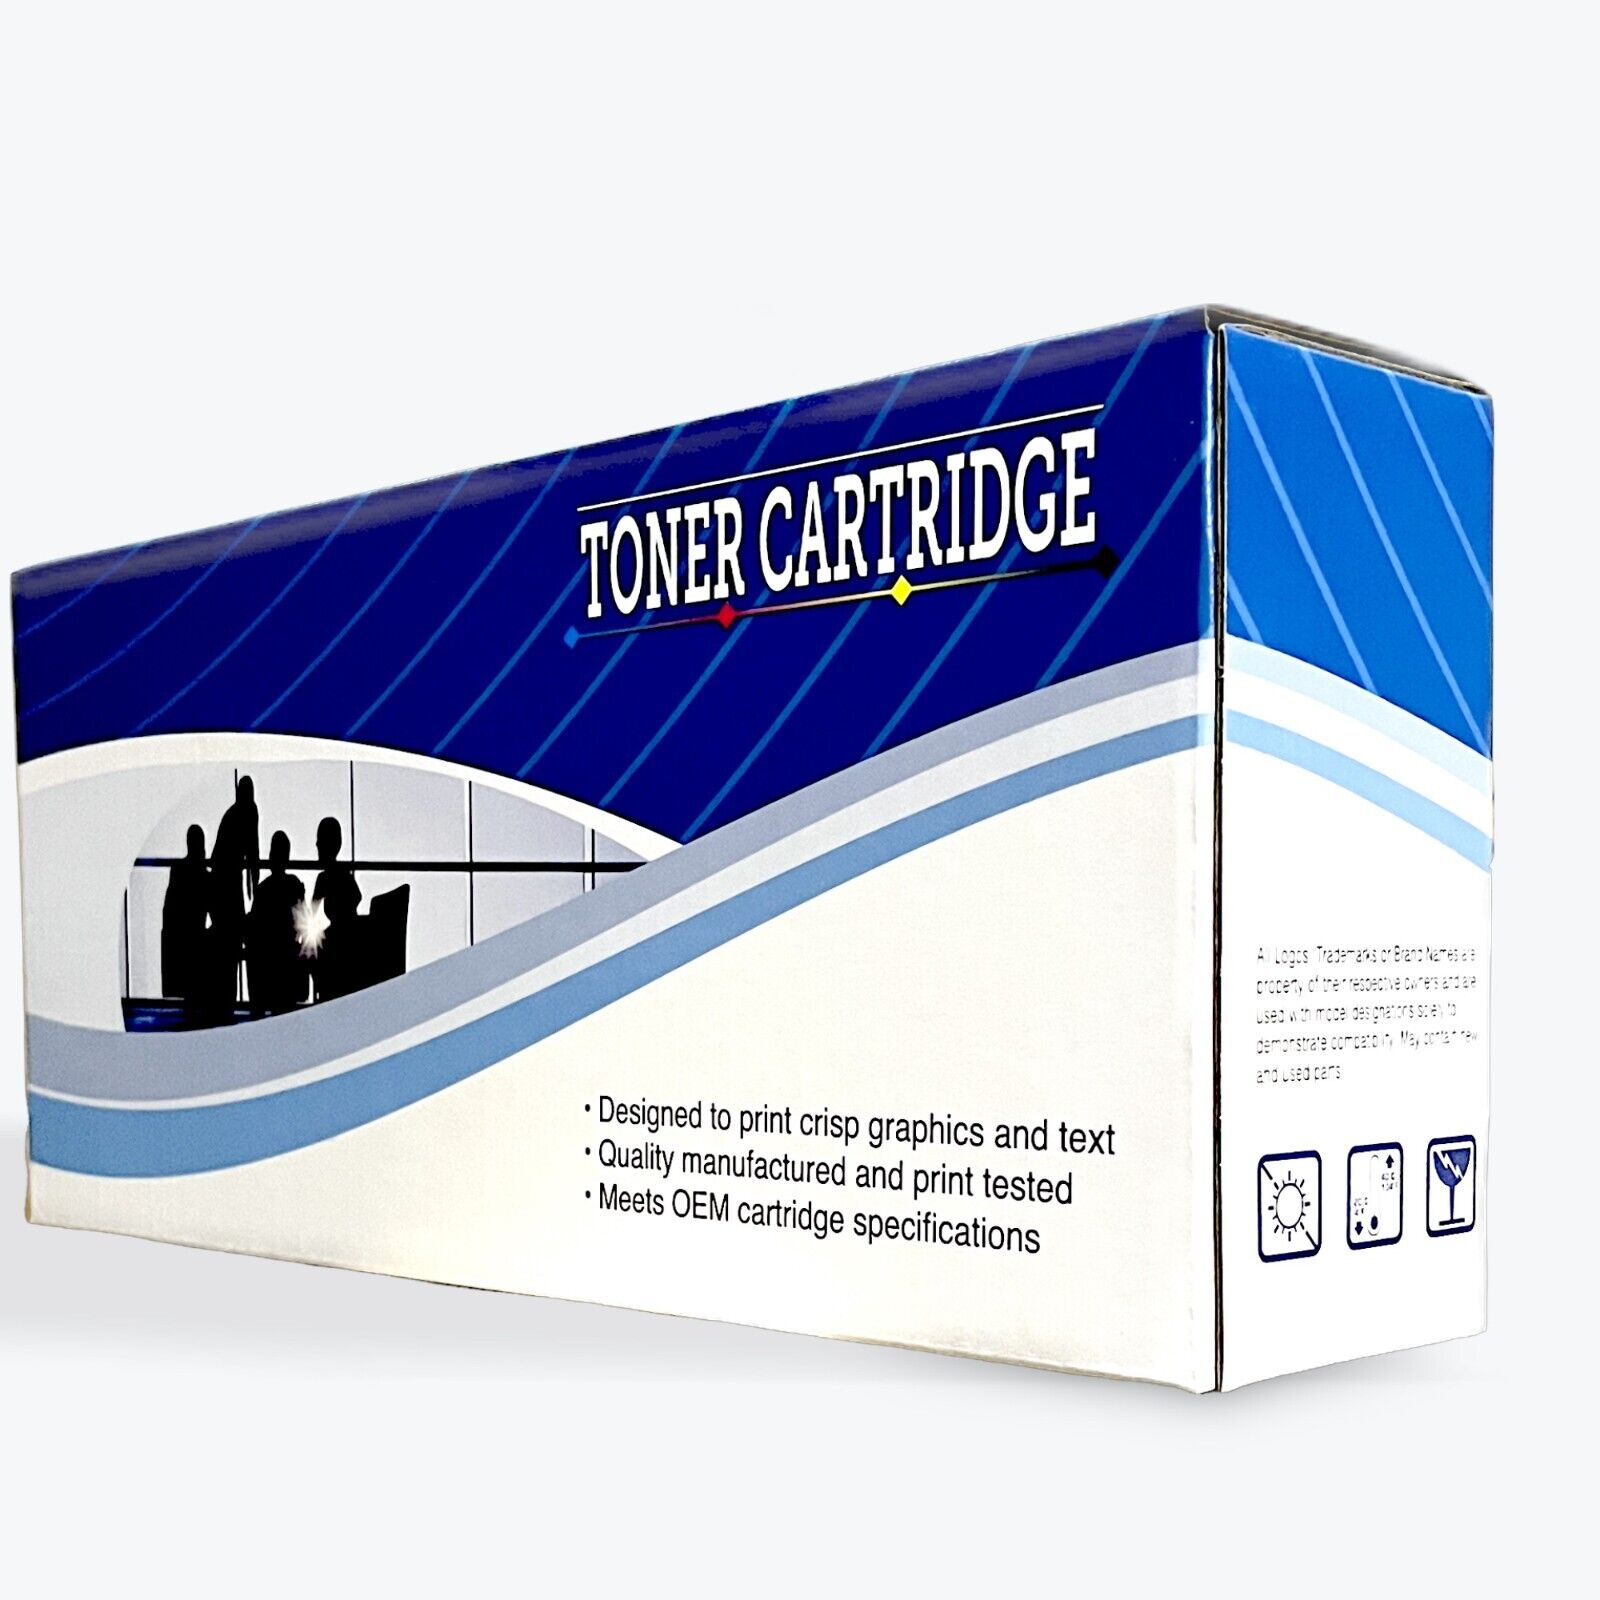 Search4Toner COMPATIBLE For Xerox 106R02309 WorkCentre 3315 Toner Cartridge